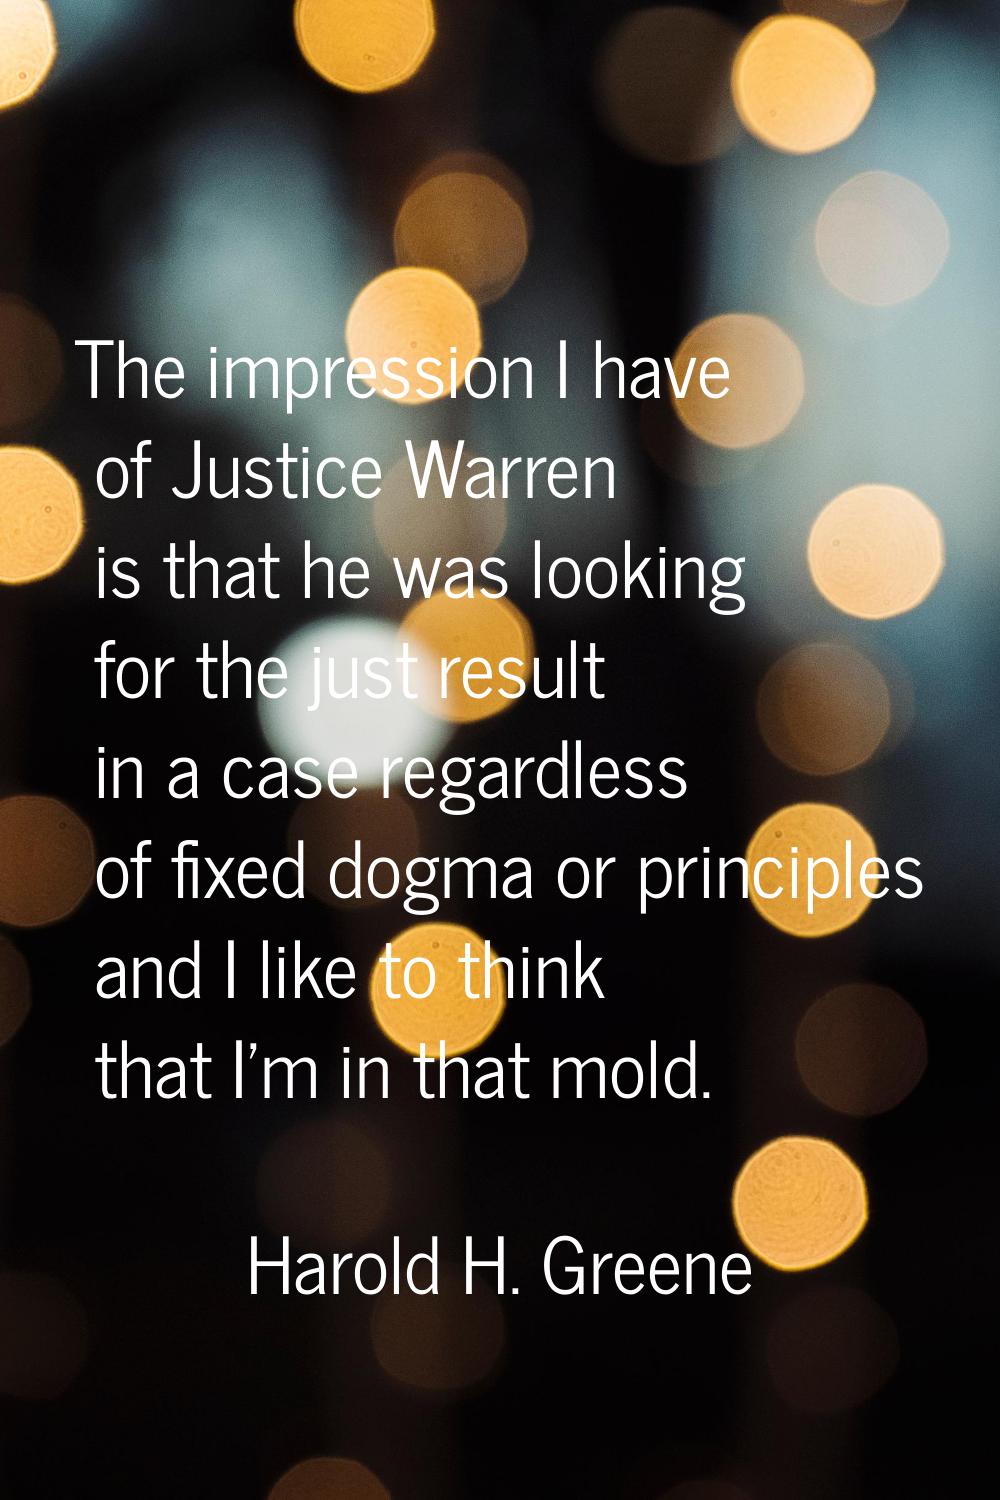 The impression I have of Justice Warren is that he was looking for the just result in a case regard